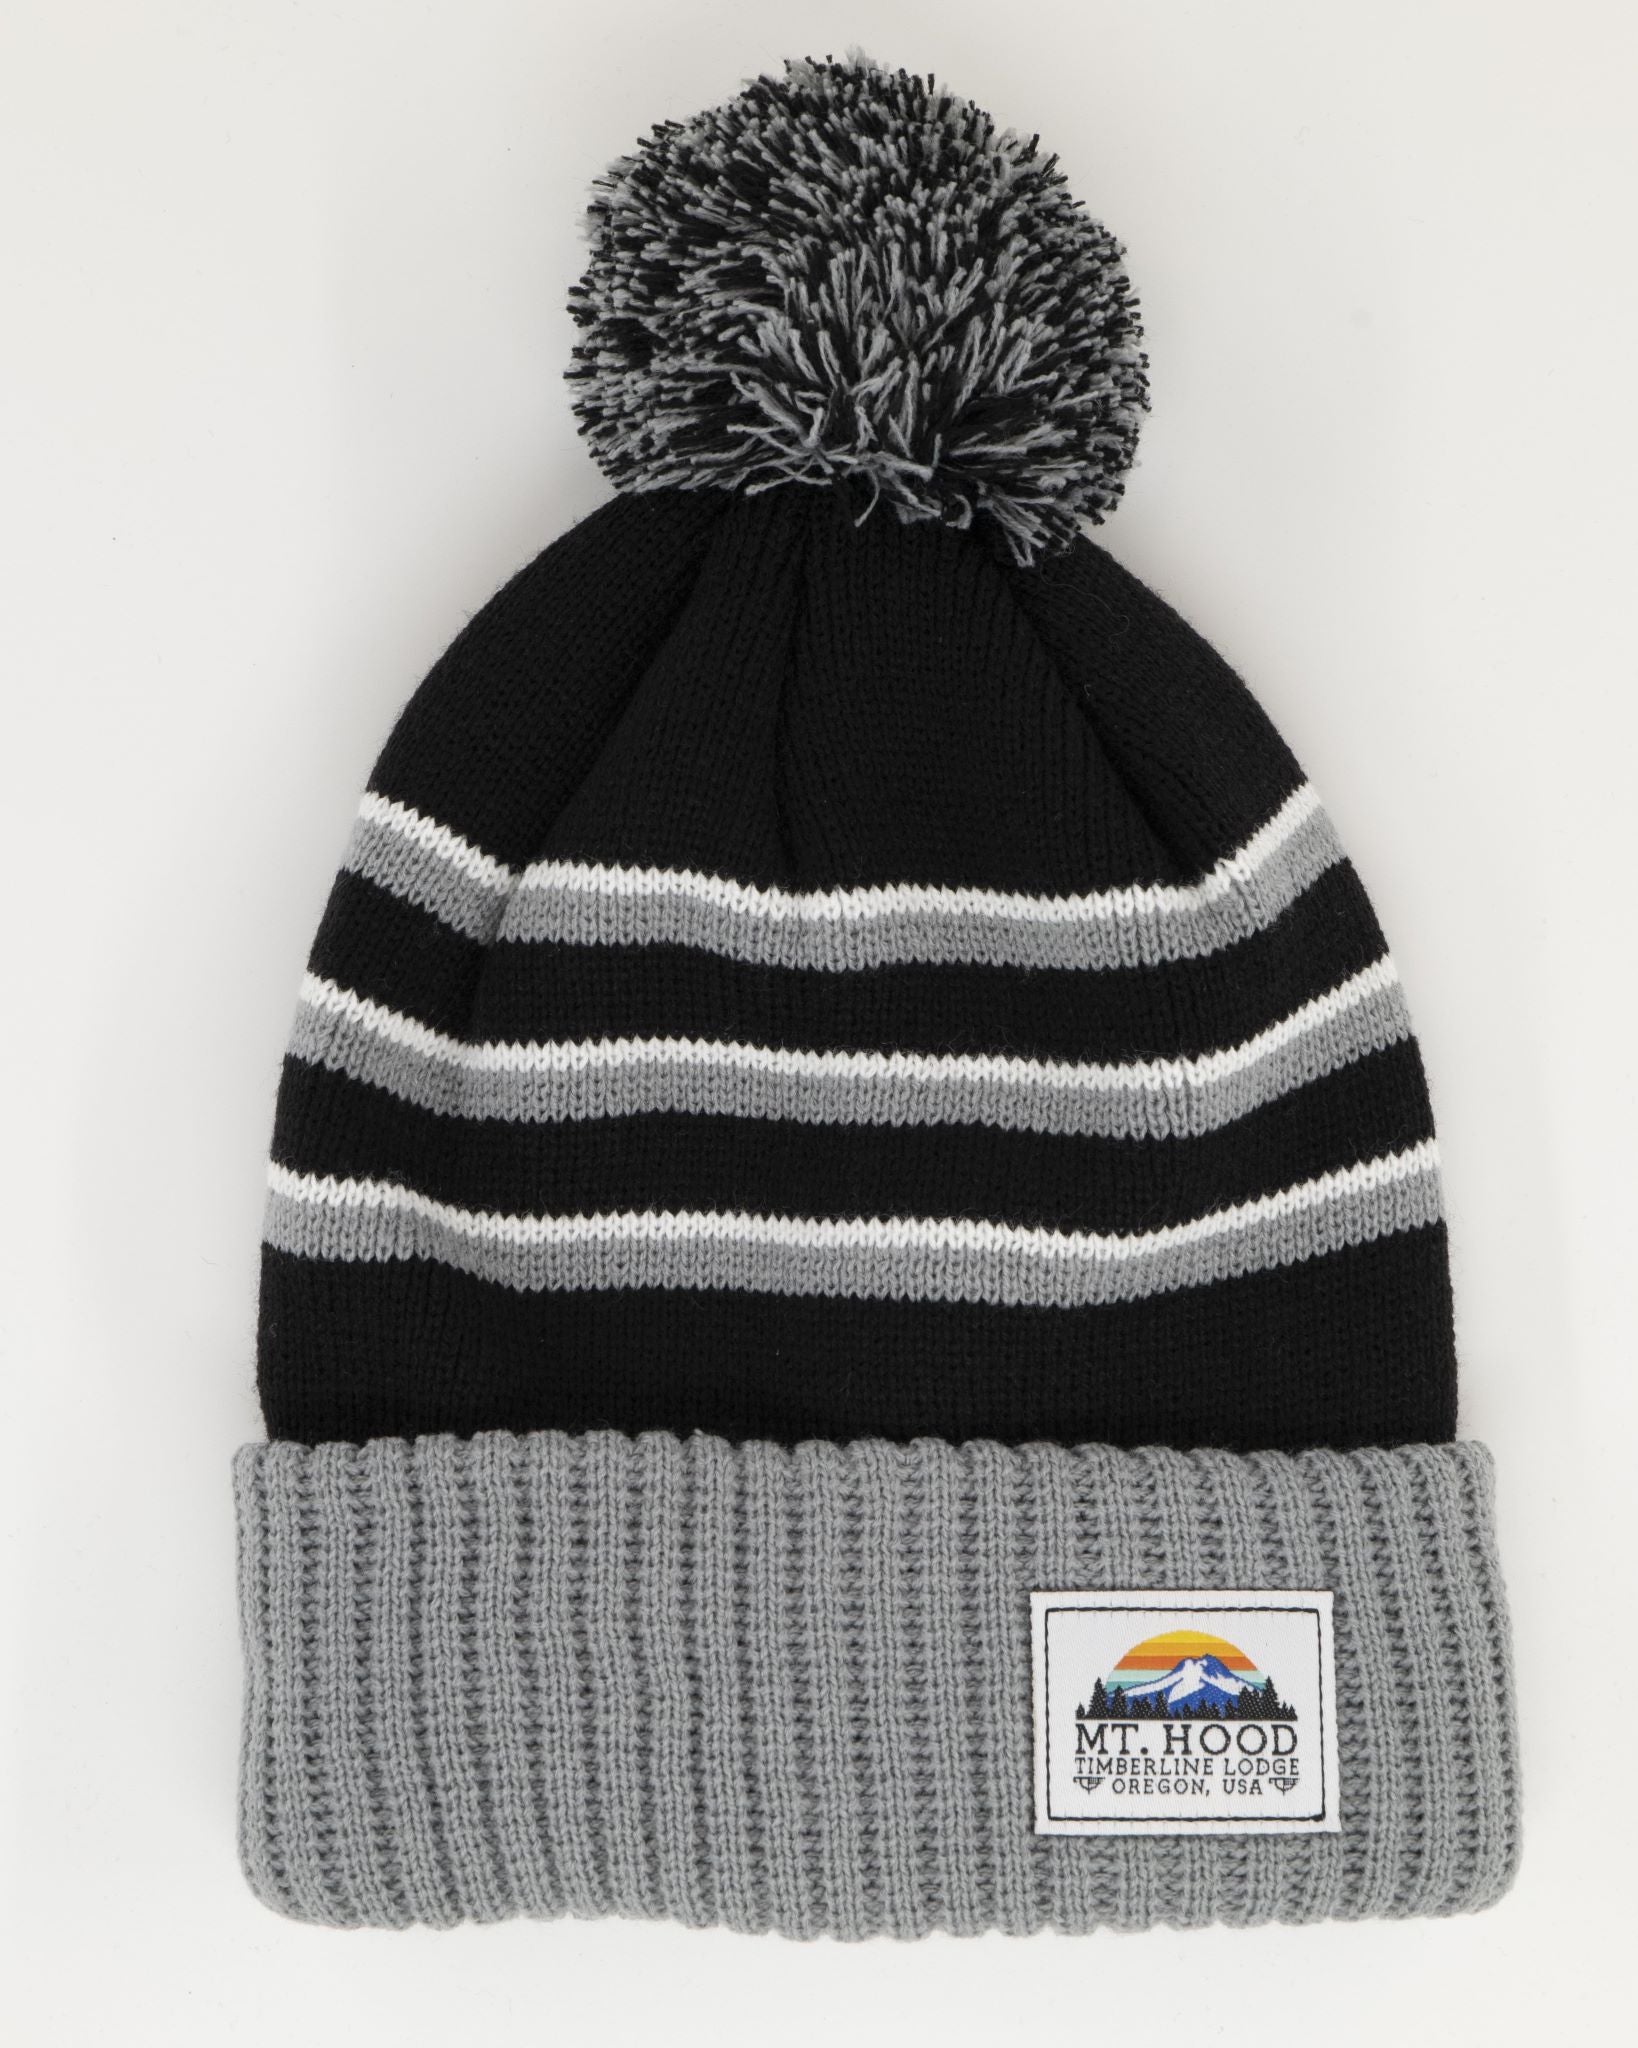 Pom Beanie - Daybreak - Available in Black, Grey, and White or Blue, B -  Timberline Lodge Online Store